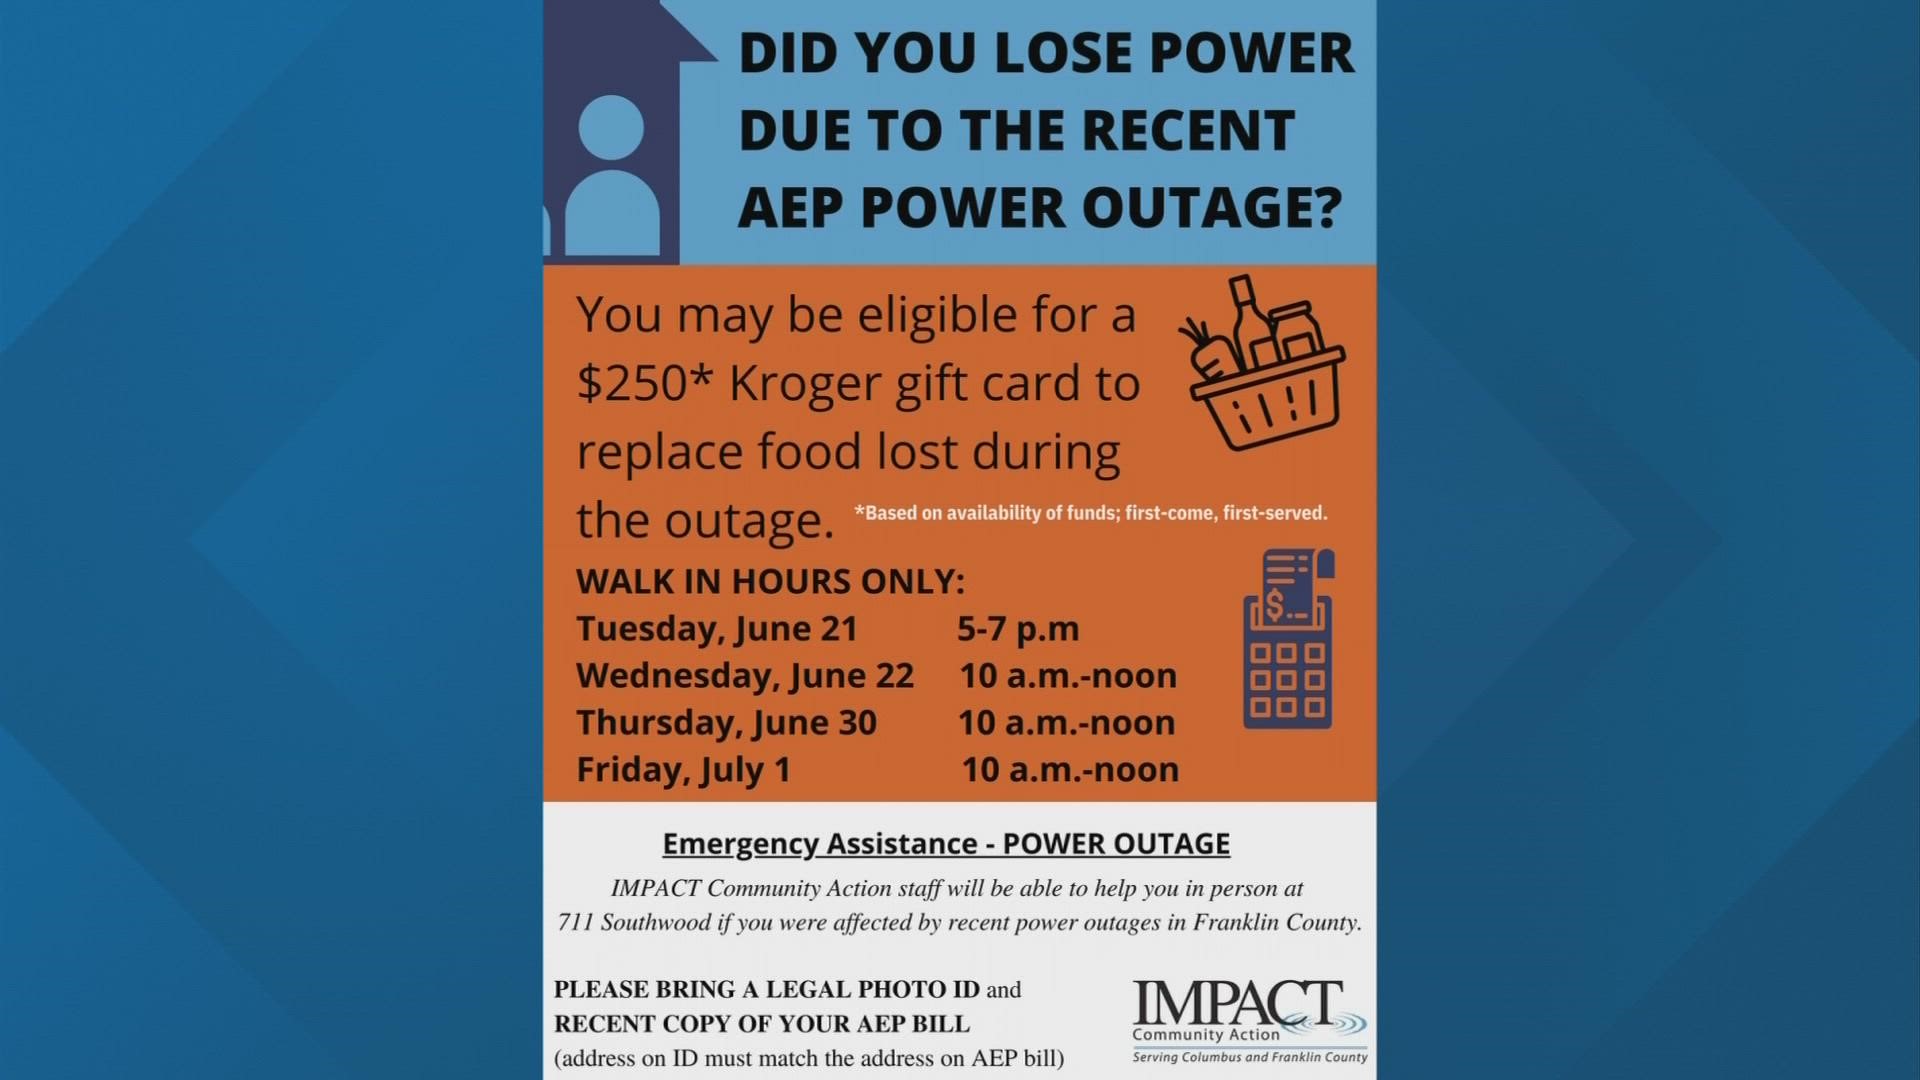 Through the power company's Neighbor to Neighbor Program, eligible customers can receive a $350 to $500 credit while funds are available.